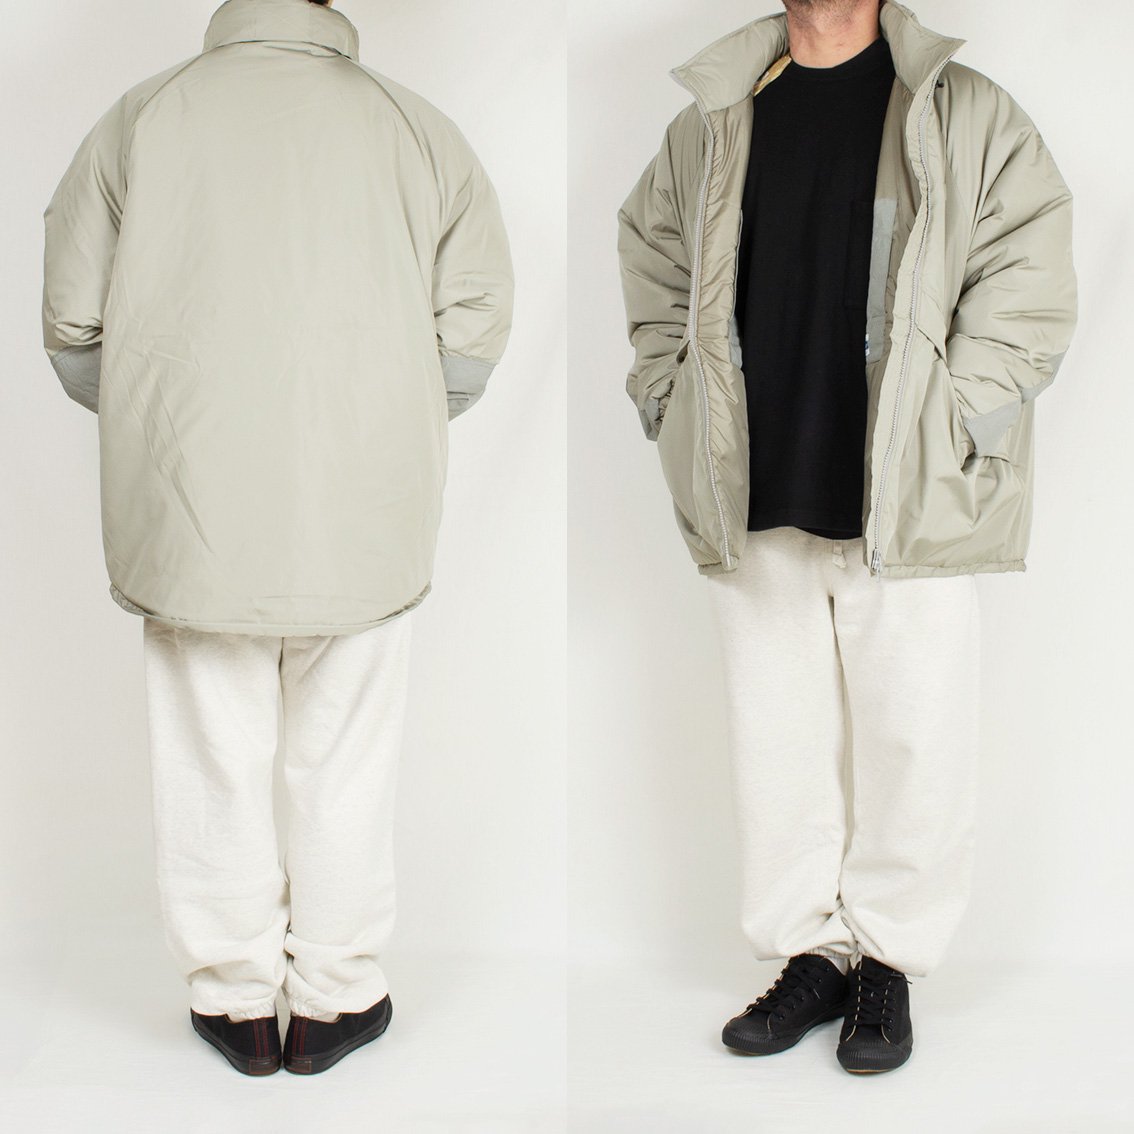 ARMY TWILL アーミーツイル POLYESTER WEATHER PADDING JACKET 